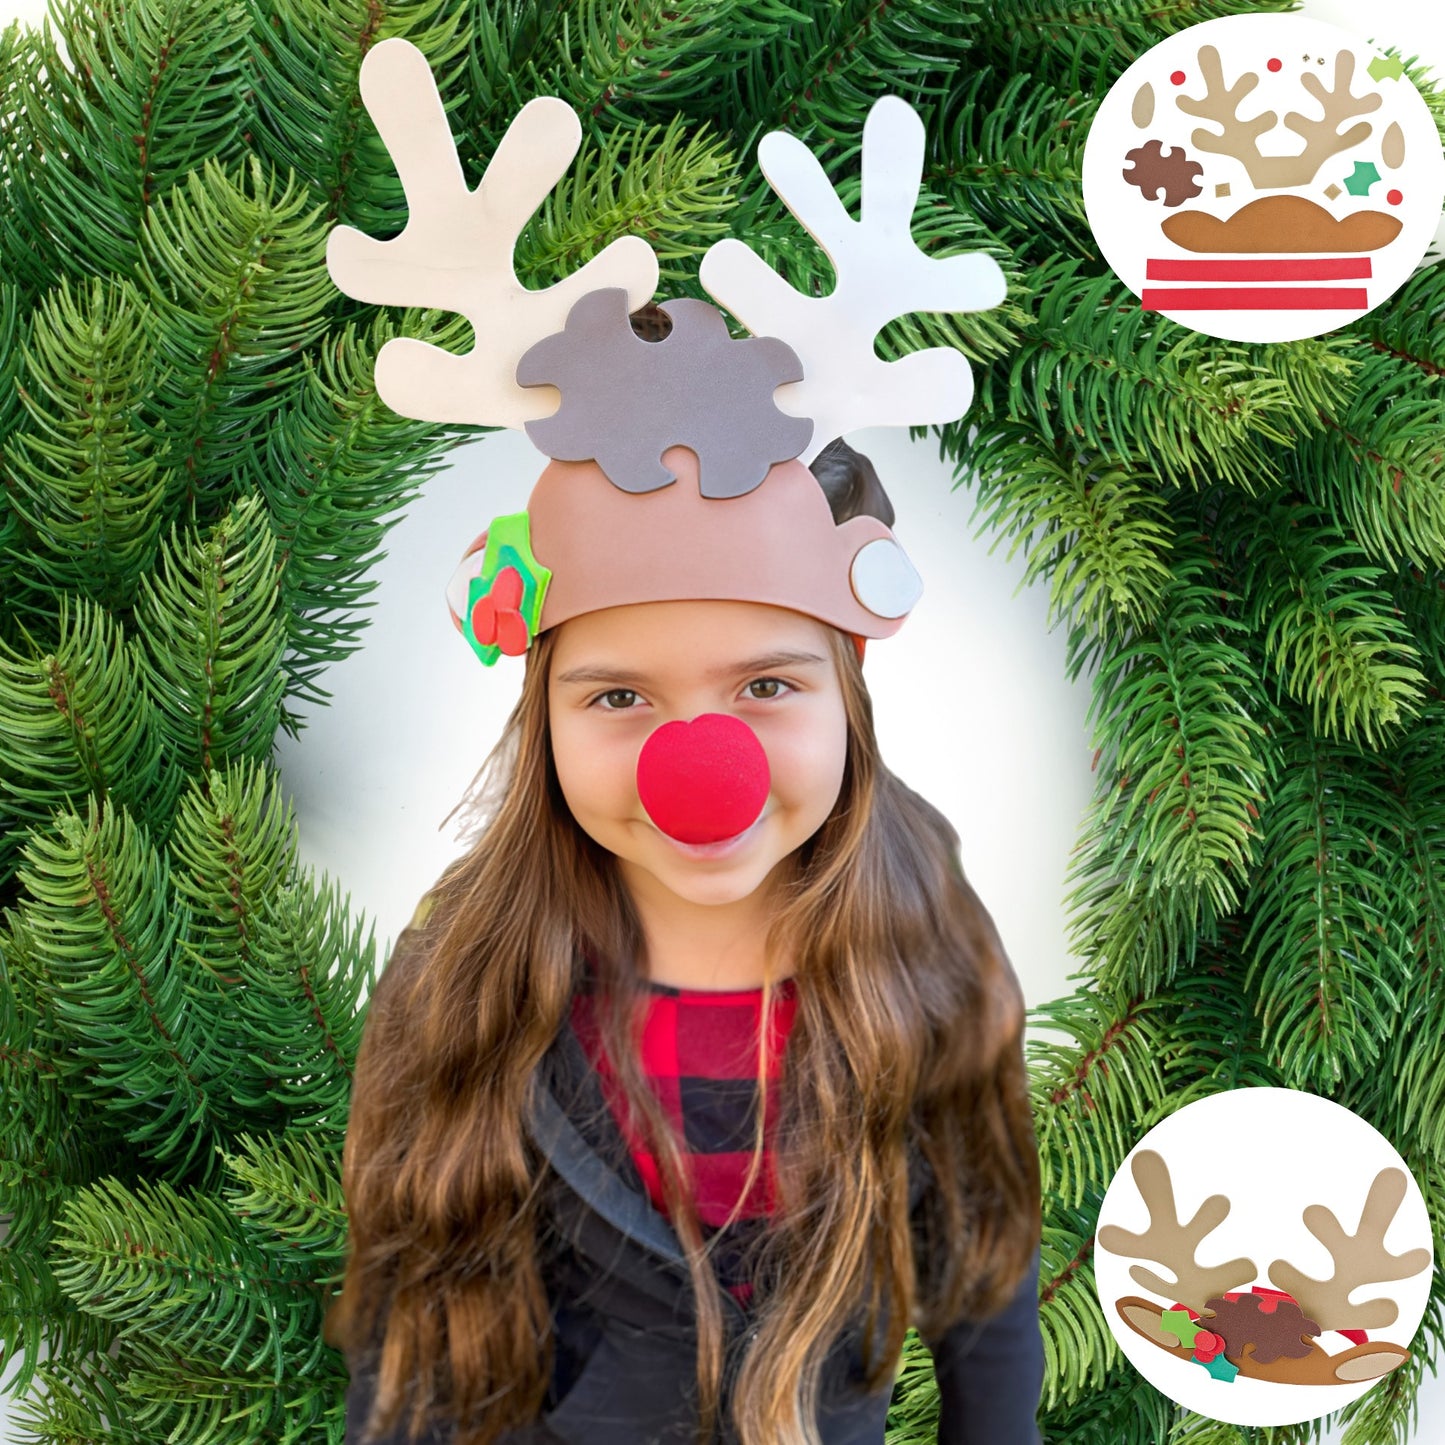 Ivy Kids Holiday Fun Kit Rudolph the Red-Nosed Reindeer